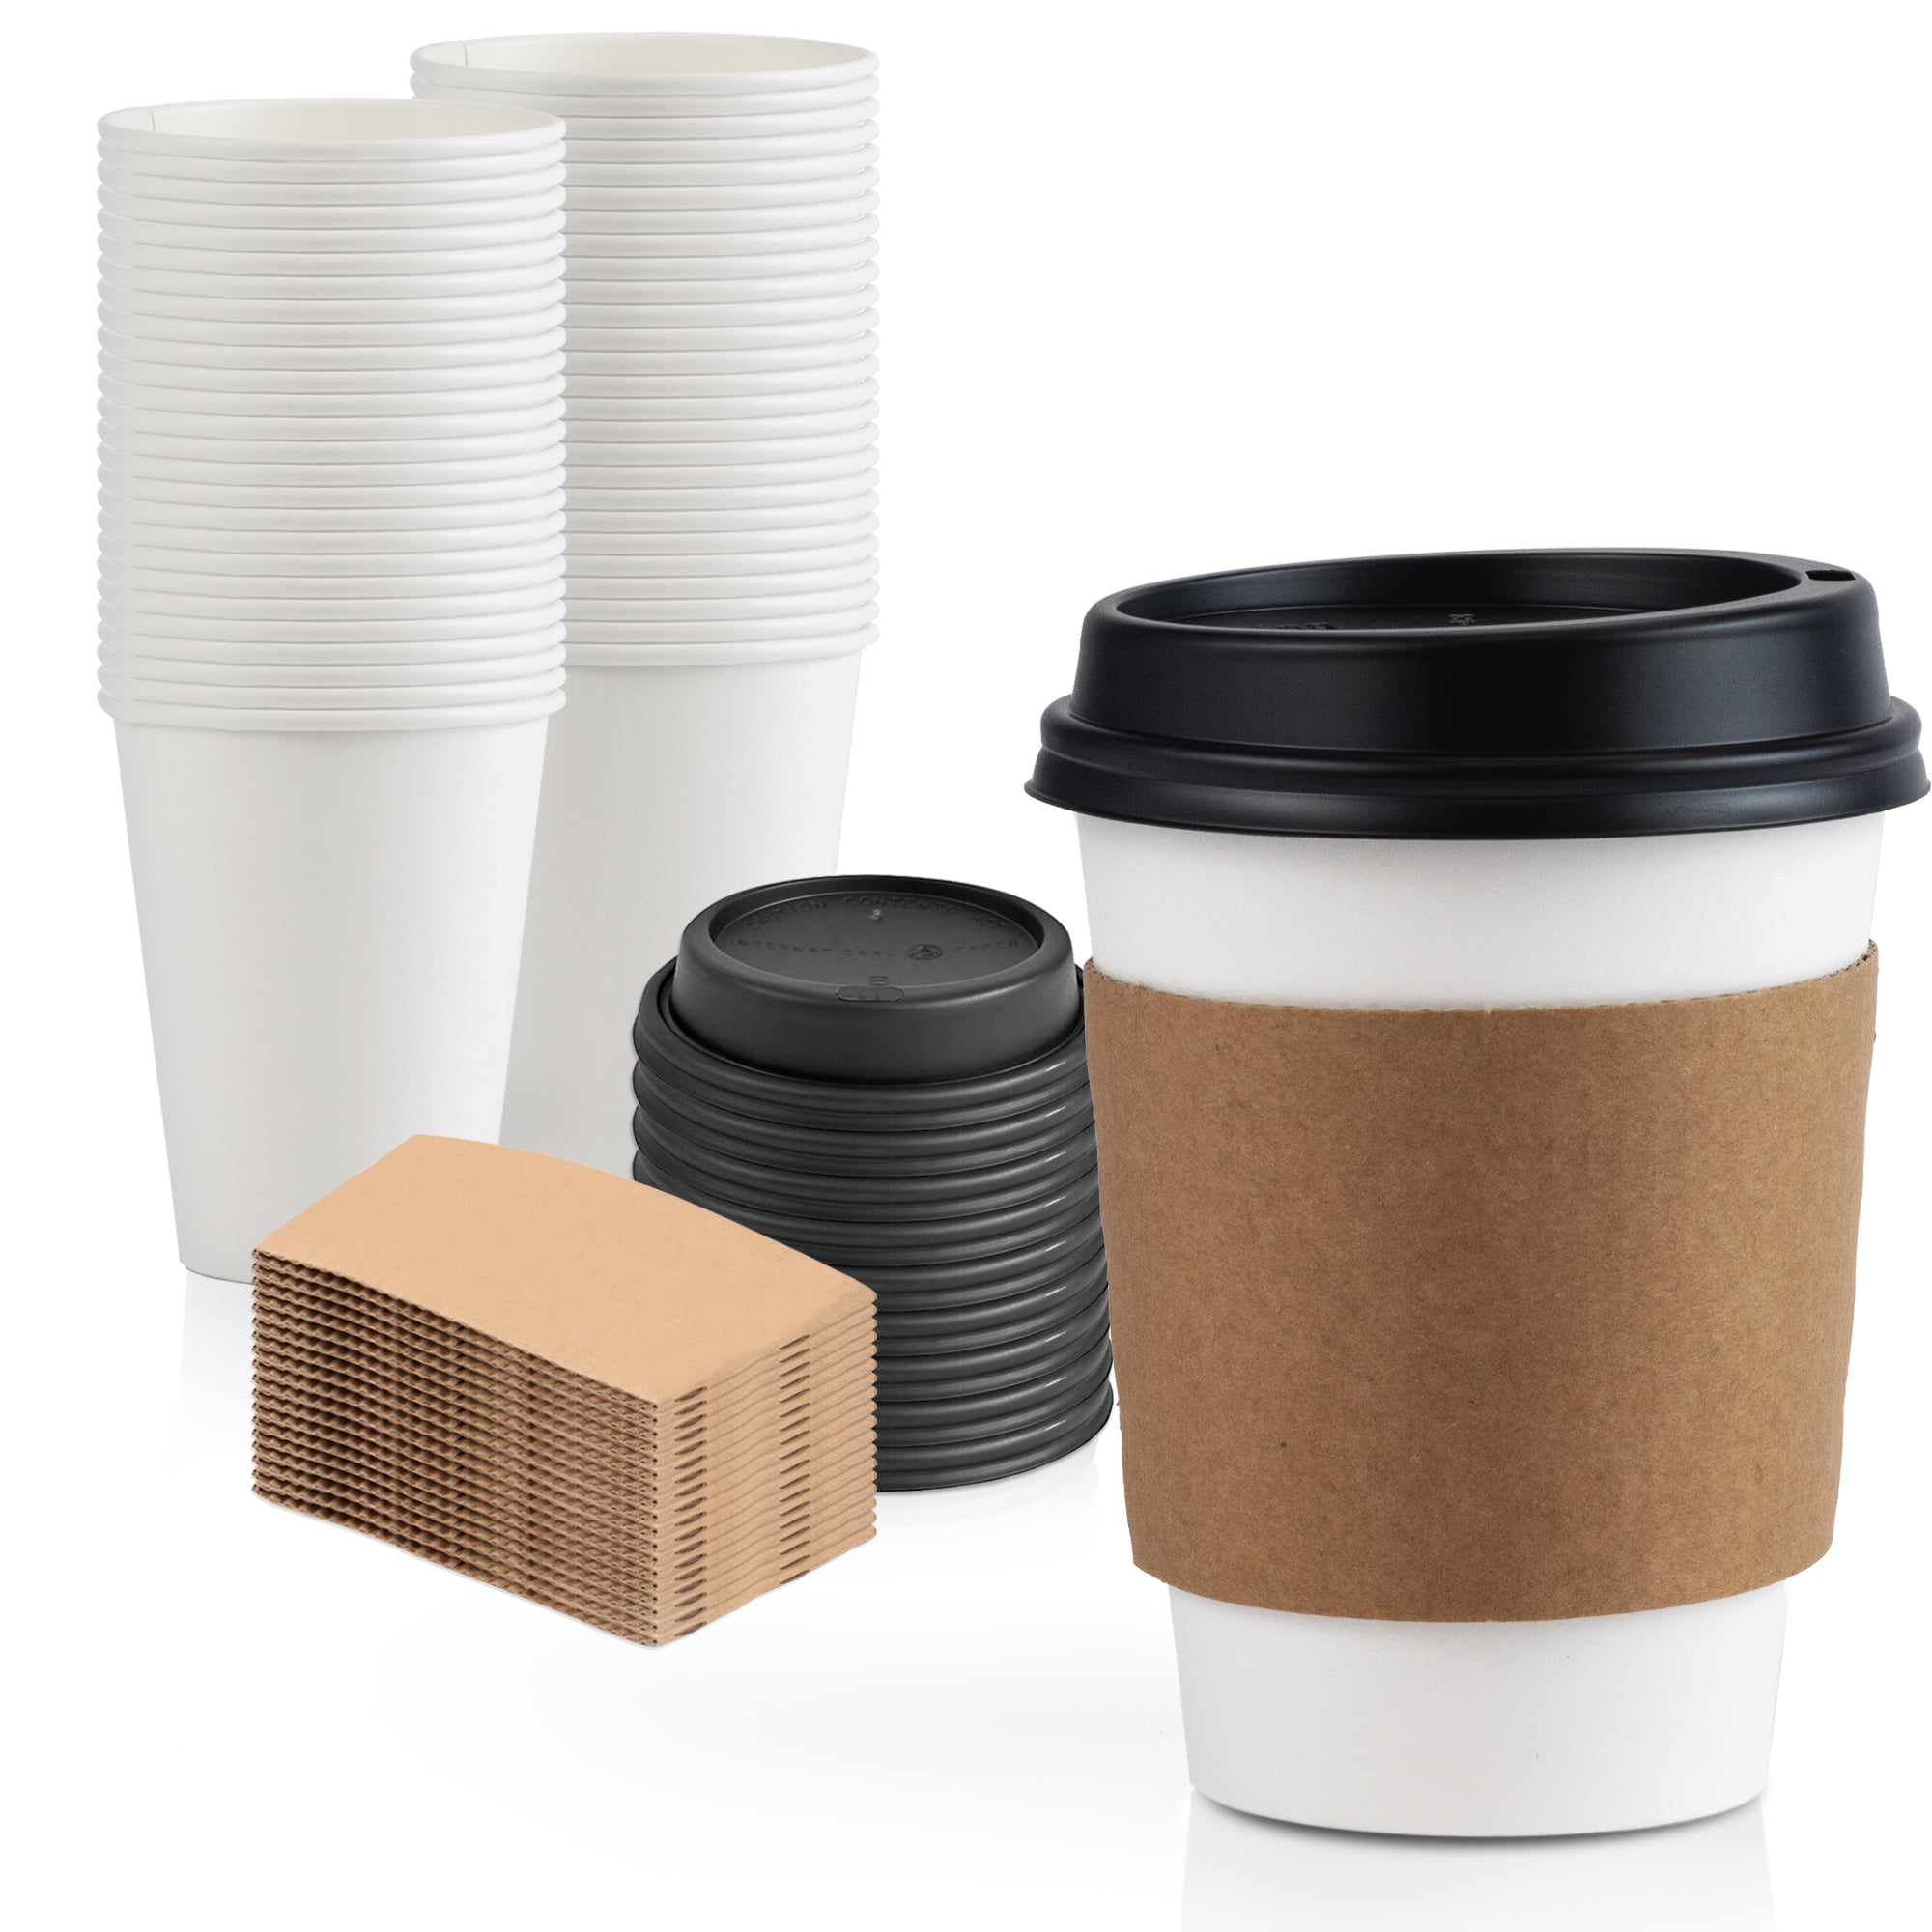 80 x 12oz Chinet Drink Cups With Lids Hot Coffee Tea Cafe Restaurant Catering 